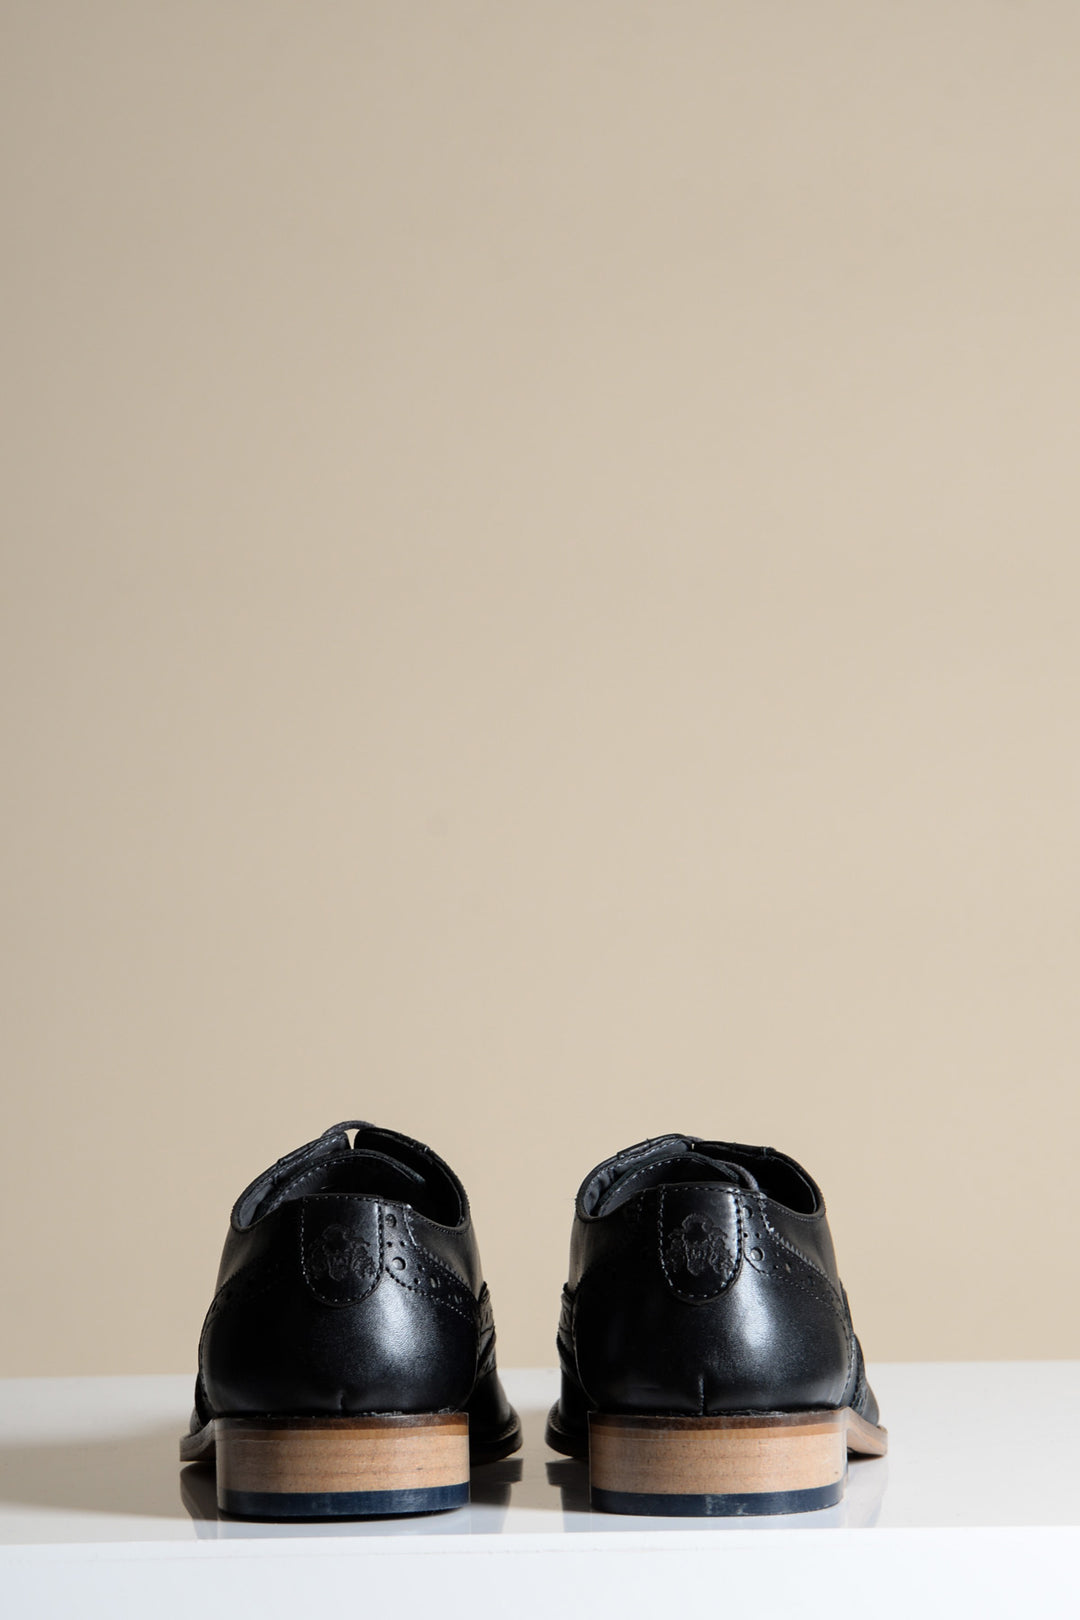 MARCO - Black Grey Leather Wingtip Oxford Shoe